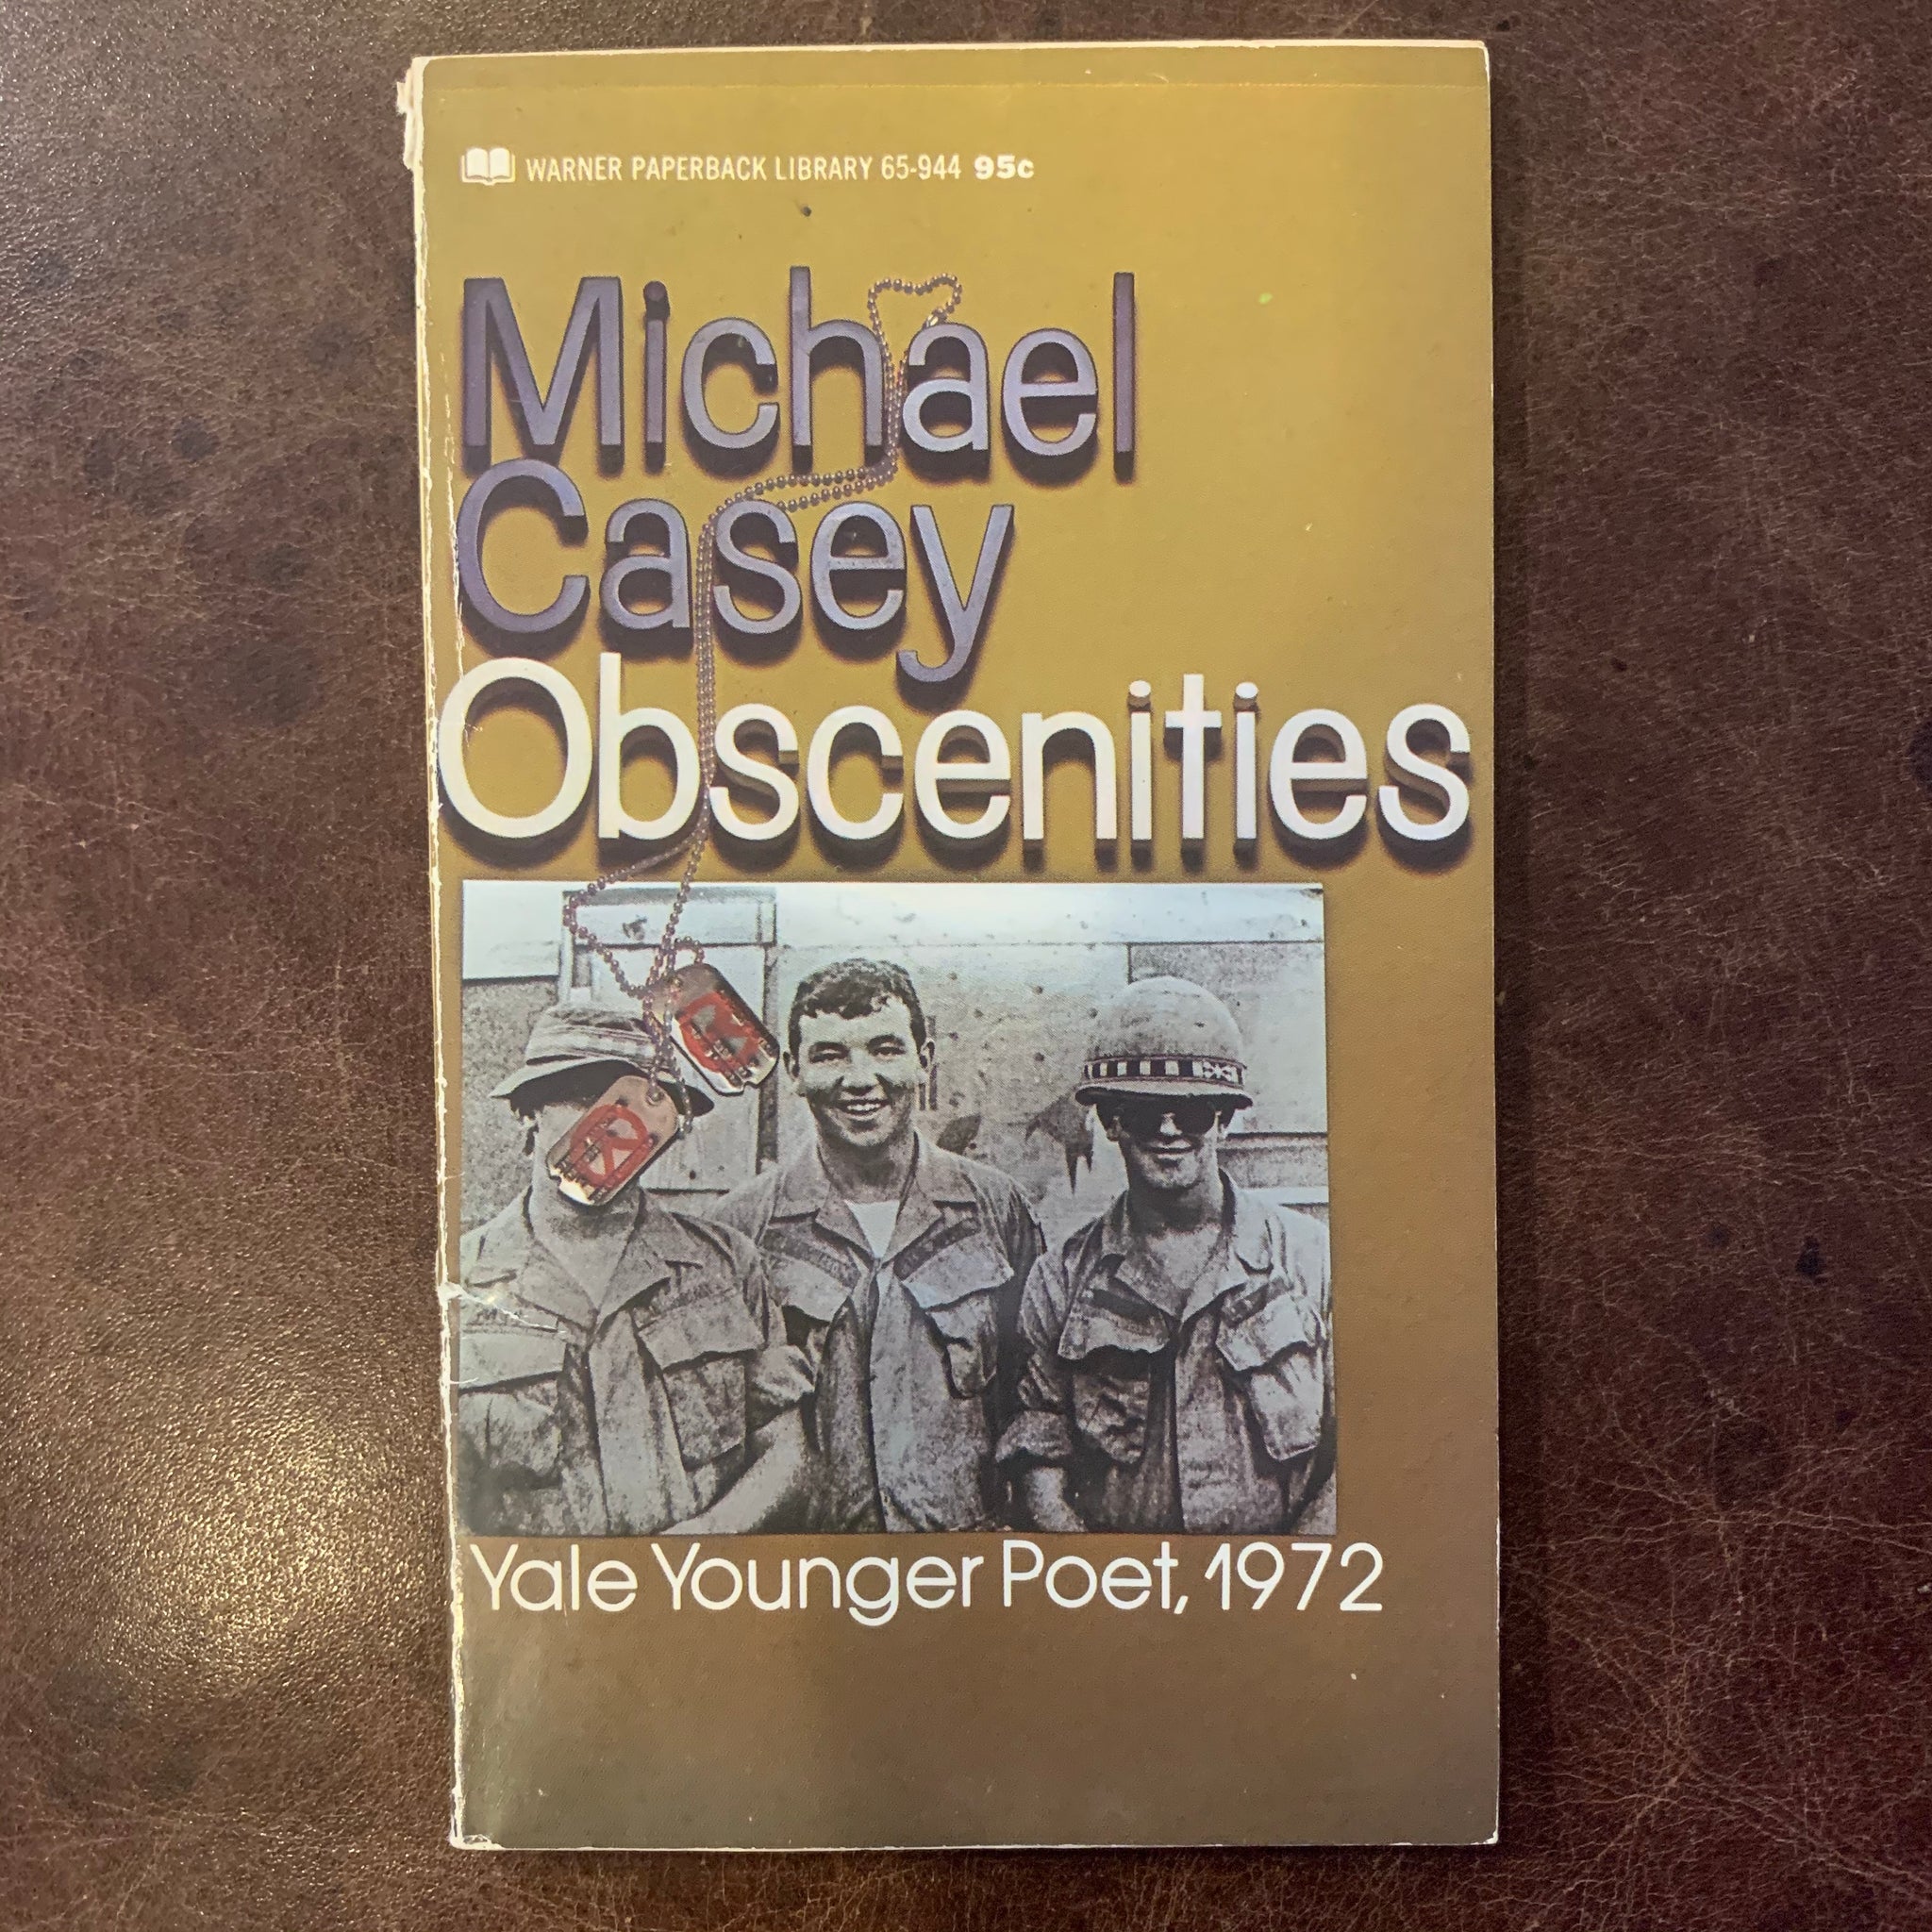 Obscenities by Michael Casey poetry